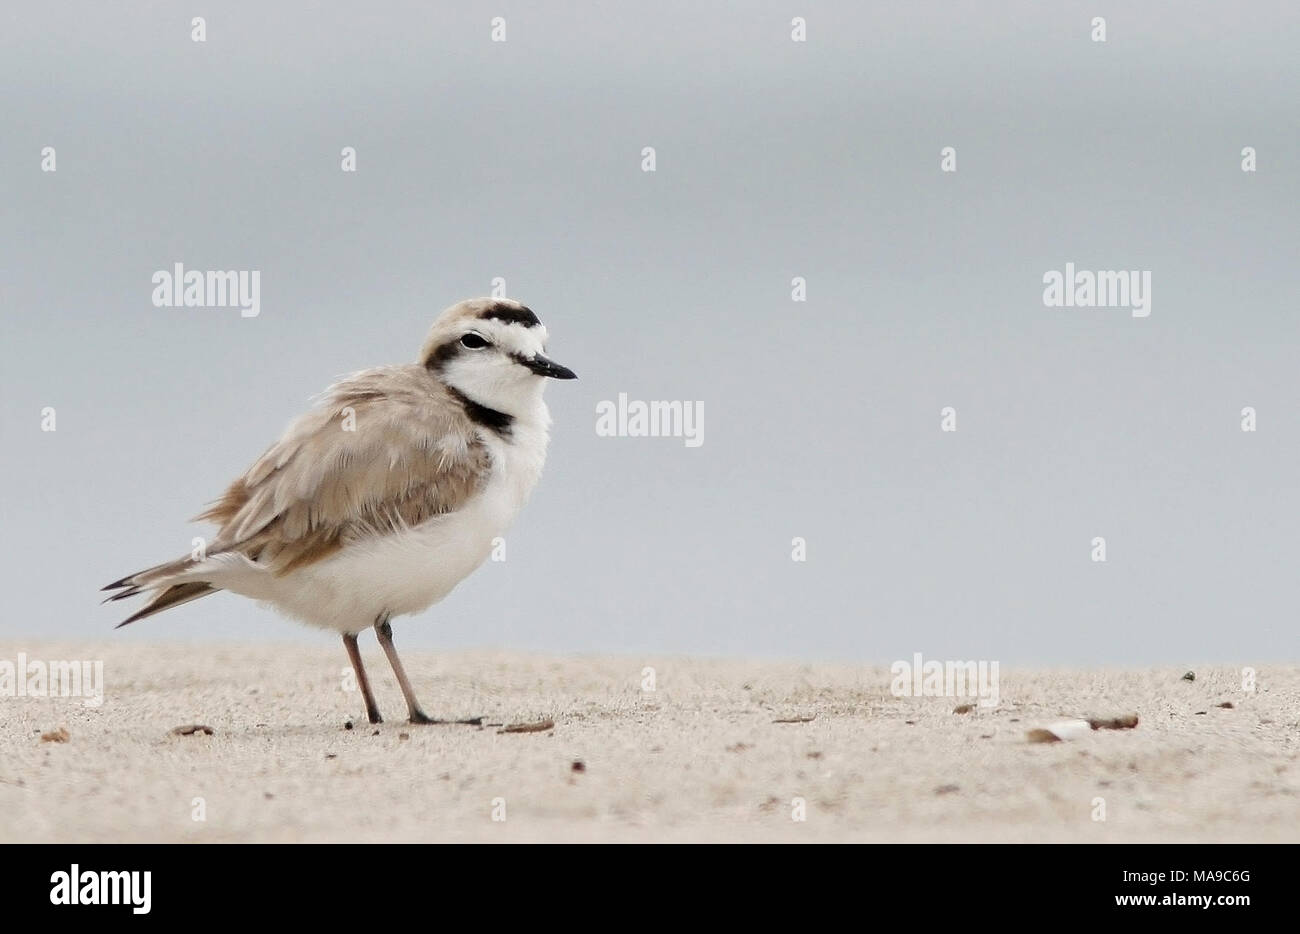 Federally Threatened Western snowy plover. The Western snowy plover is federally listed under the Endangered Species Act of 1973 as threatened and is a Bird Species of Special Conservation Concern in California.     In 2014, Air Force staff and partners successfully restored 50 acres of coastal beach and dune habitat to benefit at-risk coastal species including the Western snowy plover and endangered California least tern, resulting in a significant increase in nesting success compared to previous years. This coastal restoration effort will expand to around 300 acres through 2019. Stock Photo